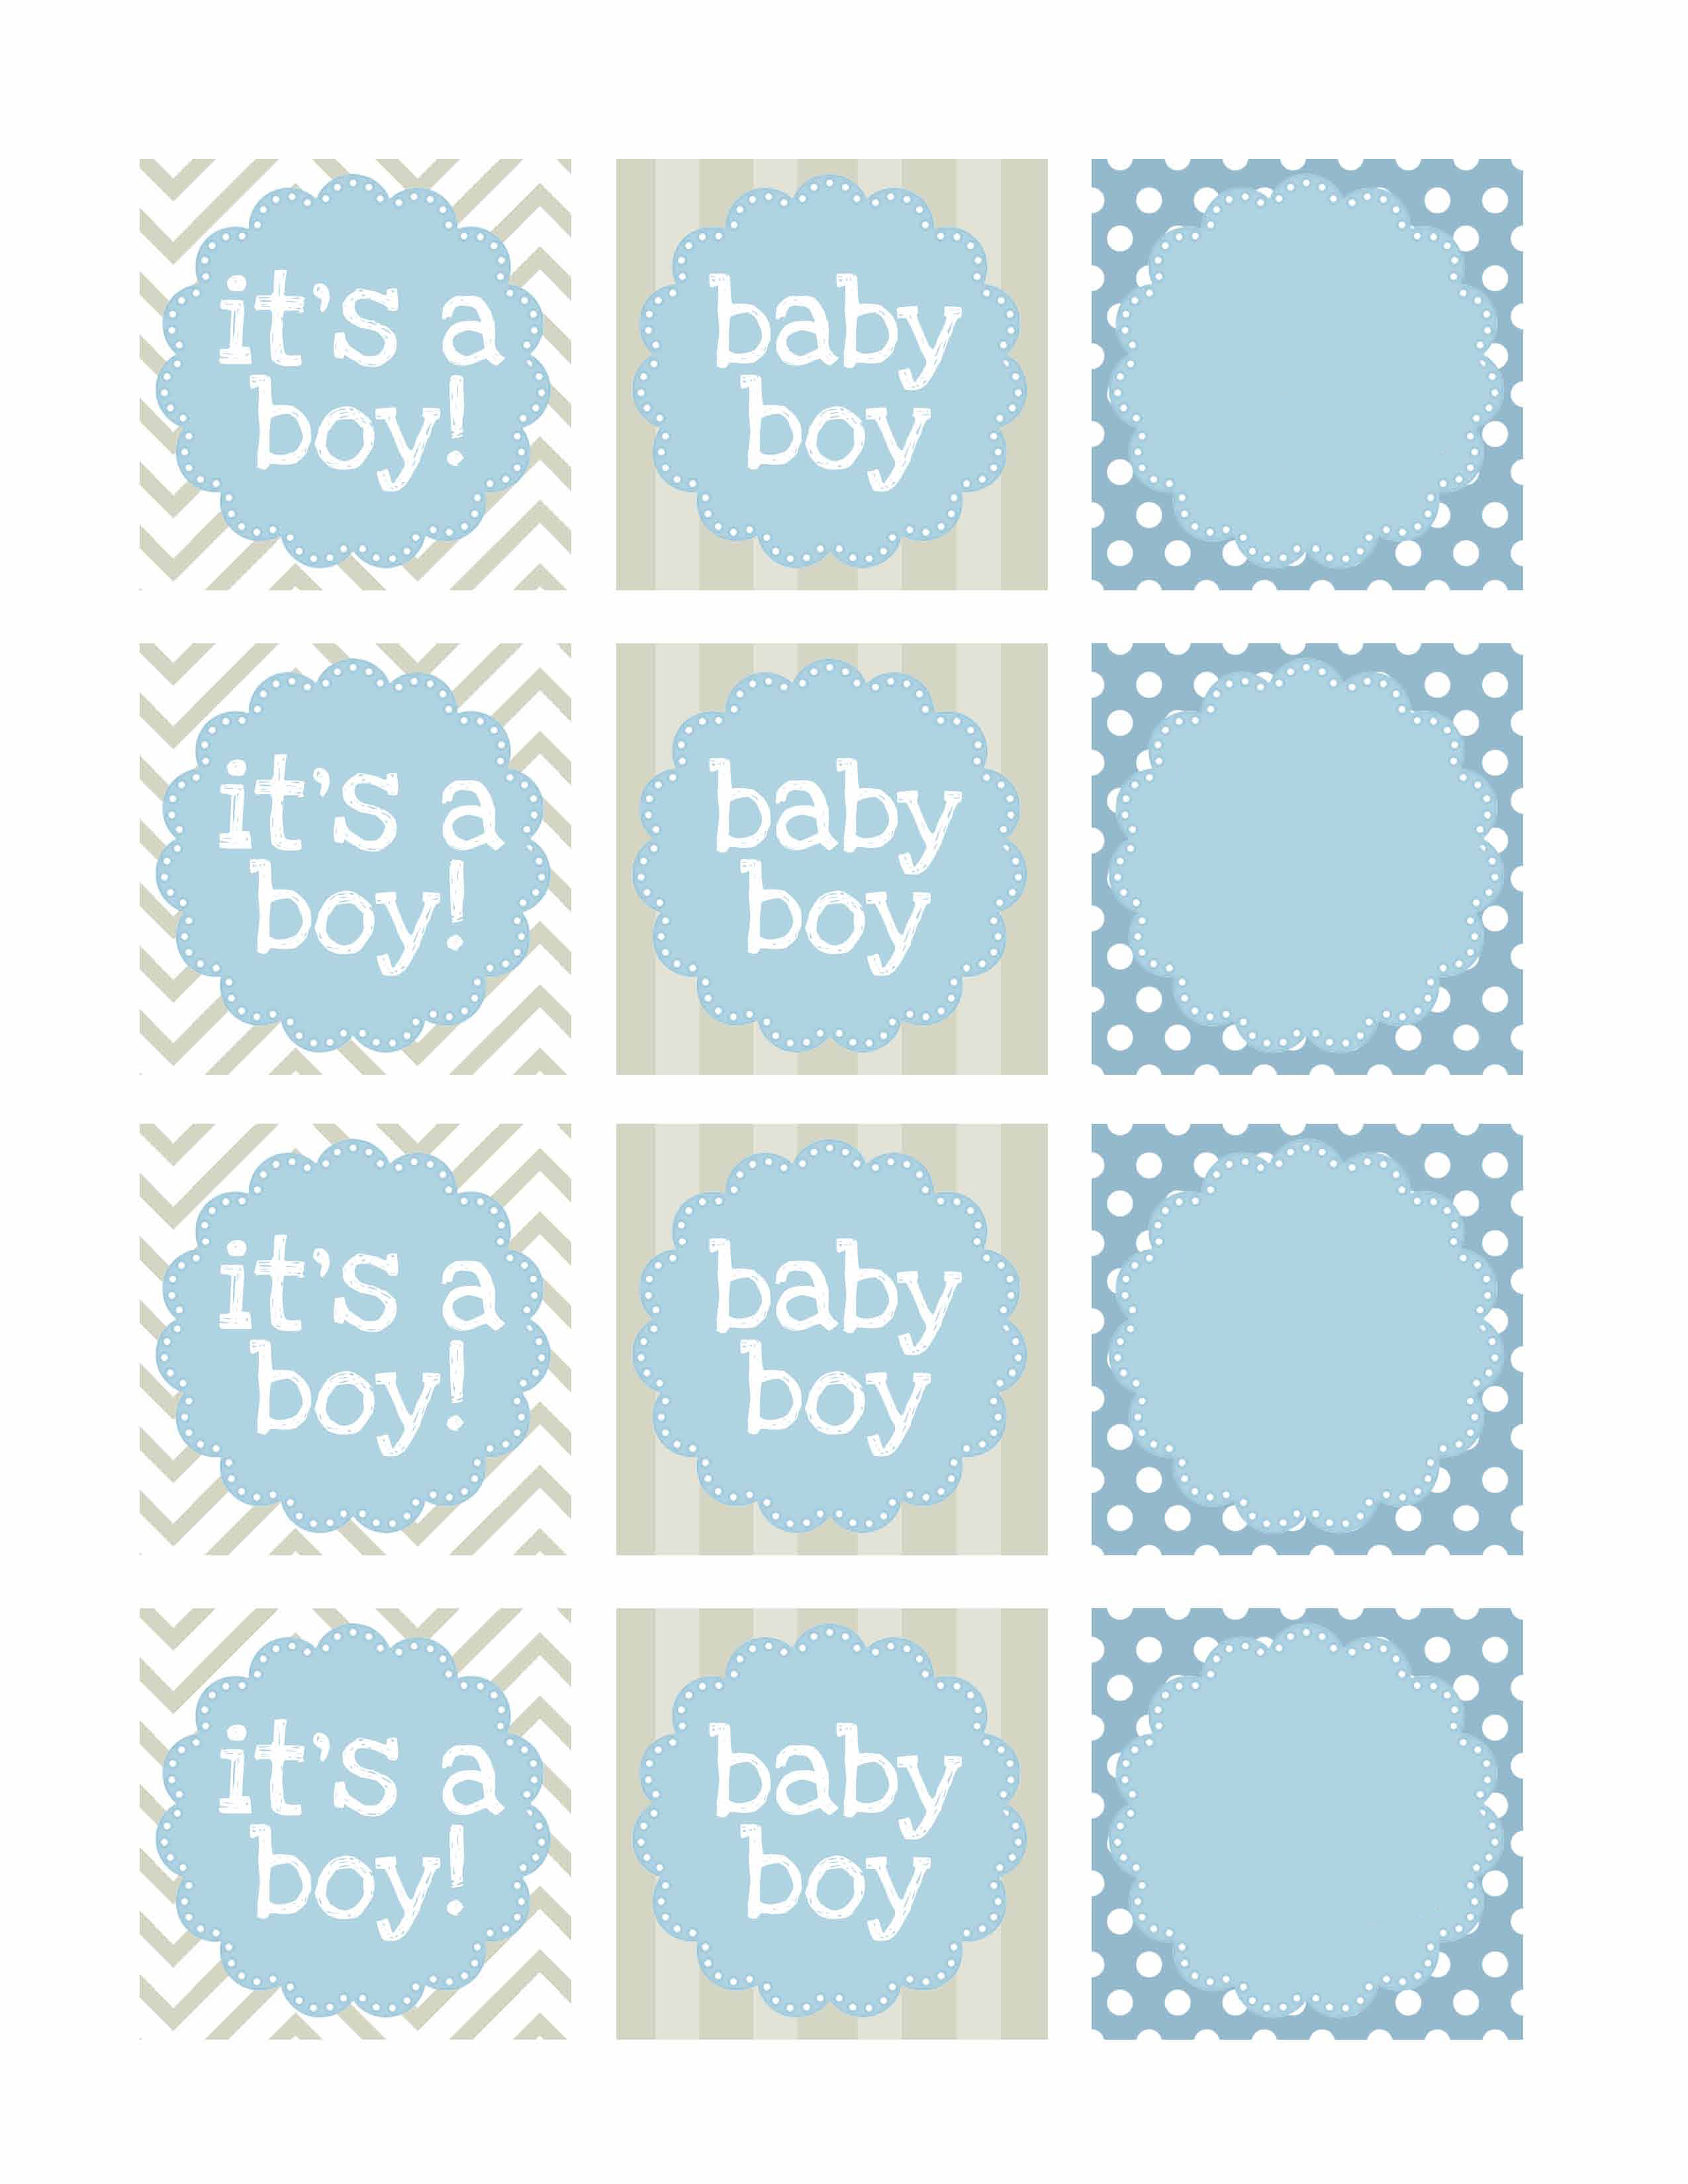 5 Best Images of Baby Shower Favor Tags Printable Baby Shower Favor